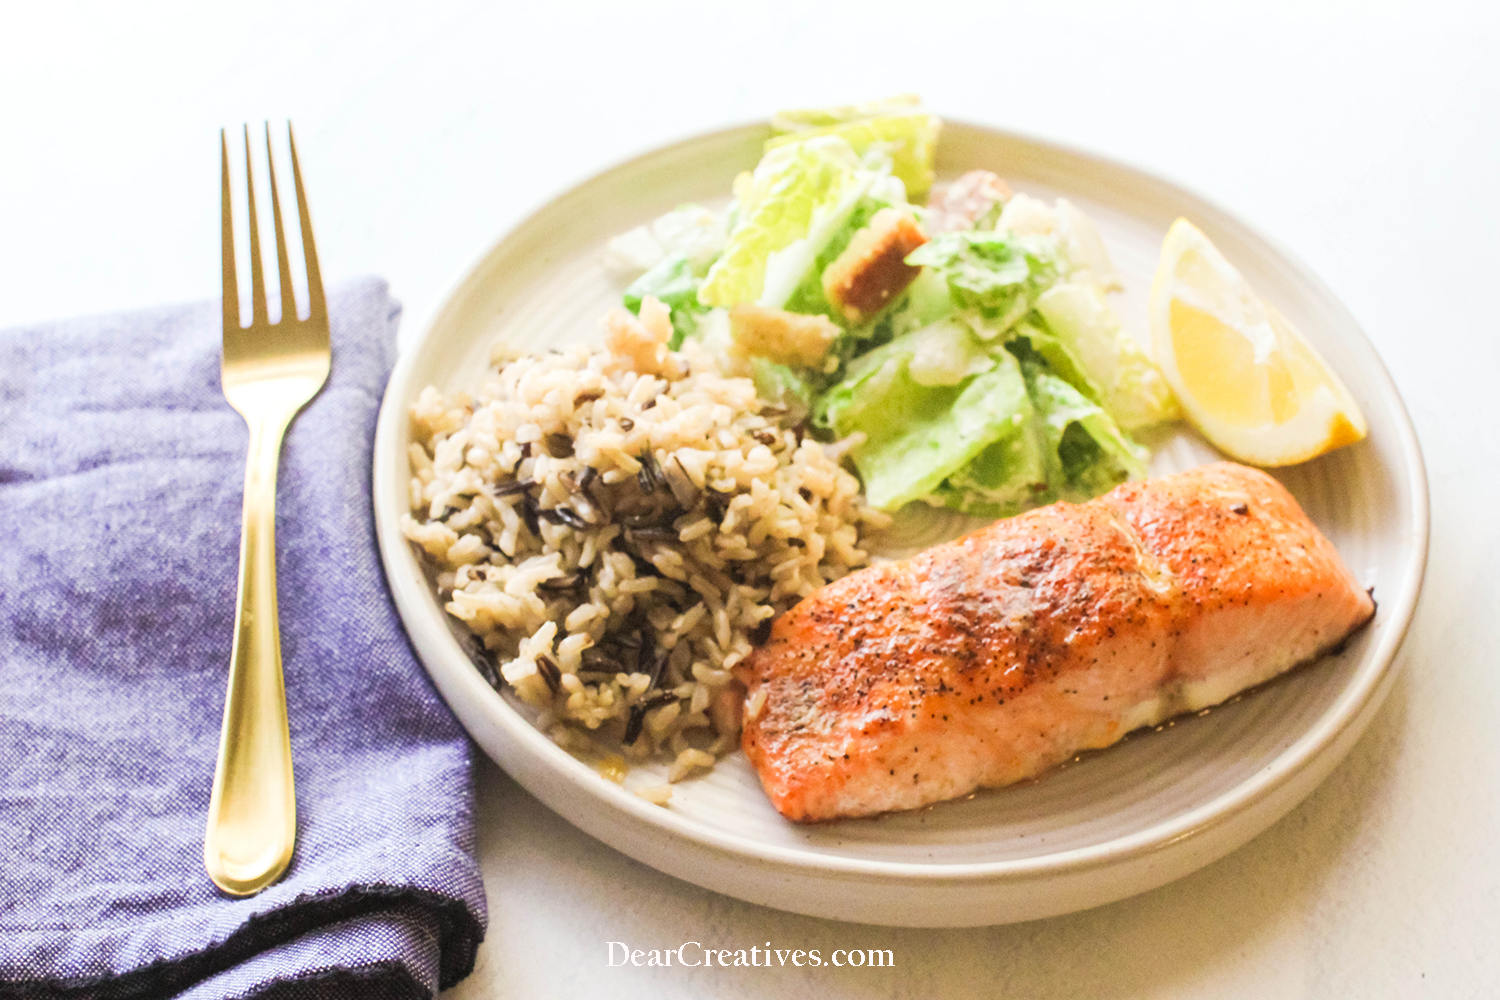 Baked Salmon on a plate with Ceasar Salad and rice - salmon dinner recipe at © DearCreatives.com